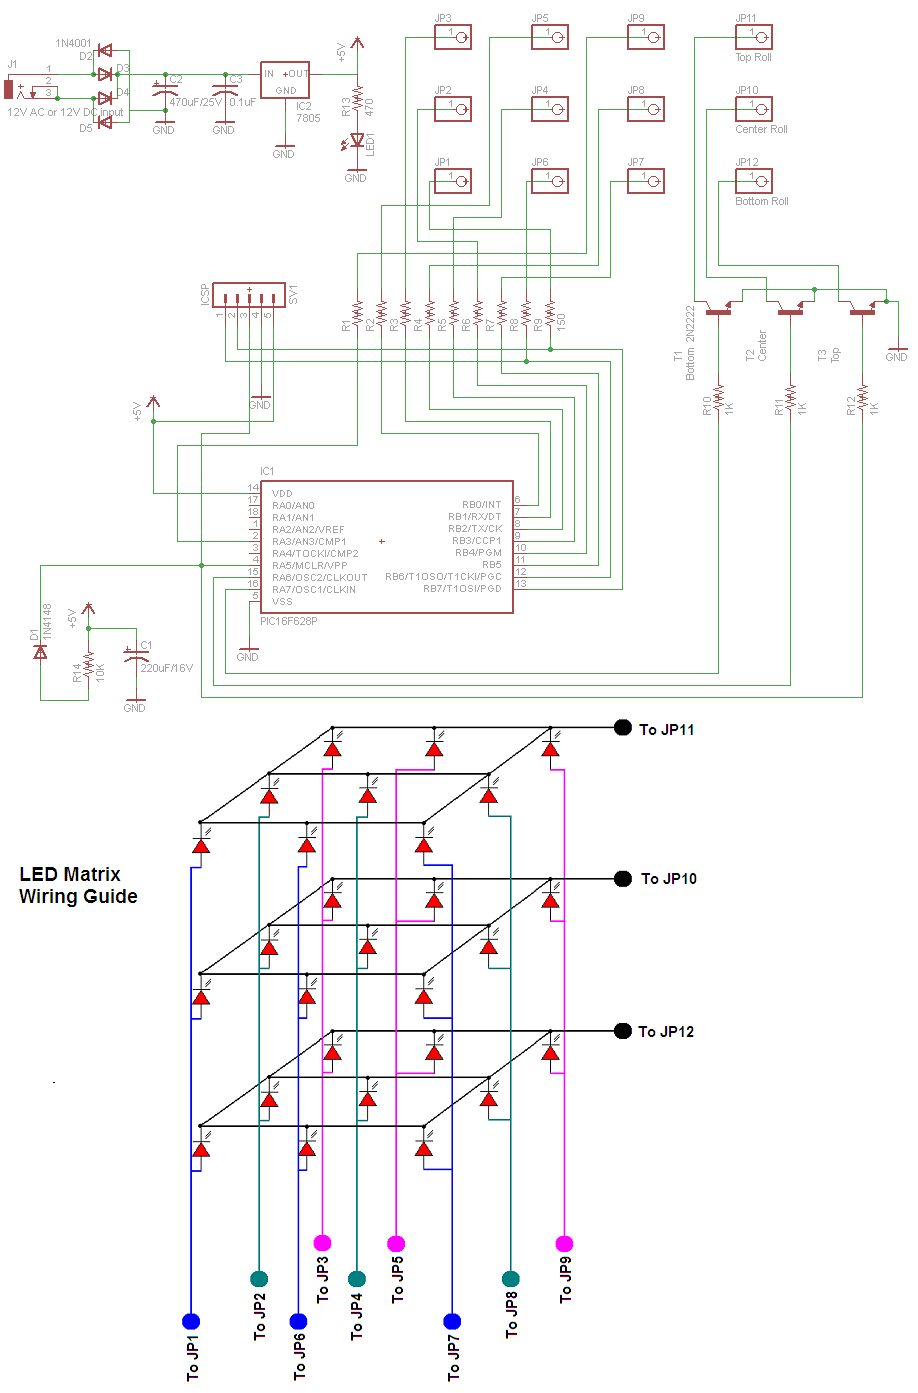 schematic-with-led-wiring-guide-png.44593